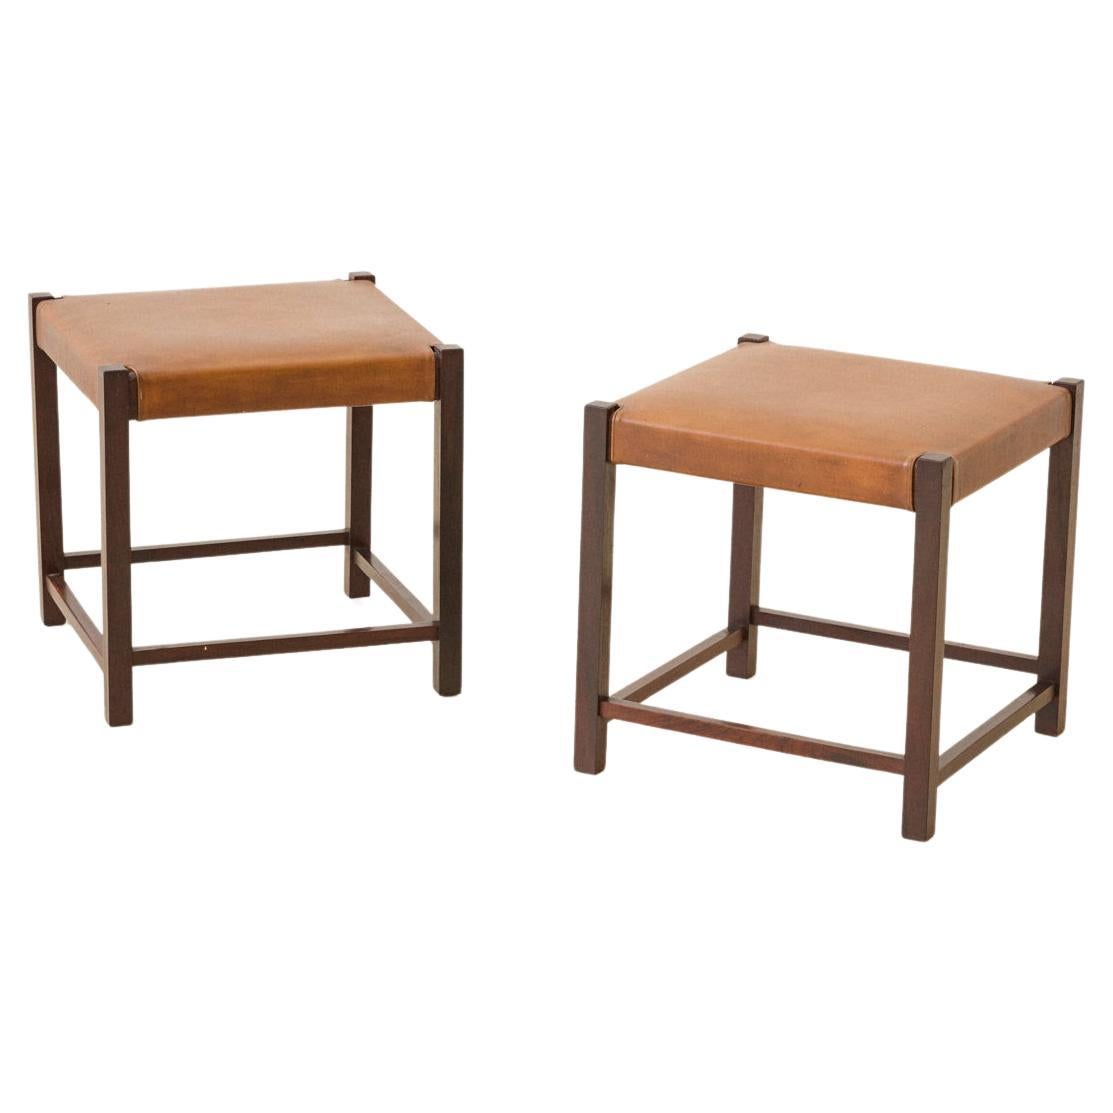 Pair of Brazilian Vintage Rosewood and Leather Stools, Unknown Designer, 1960s For Sale